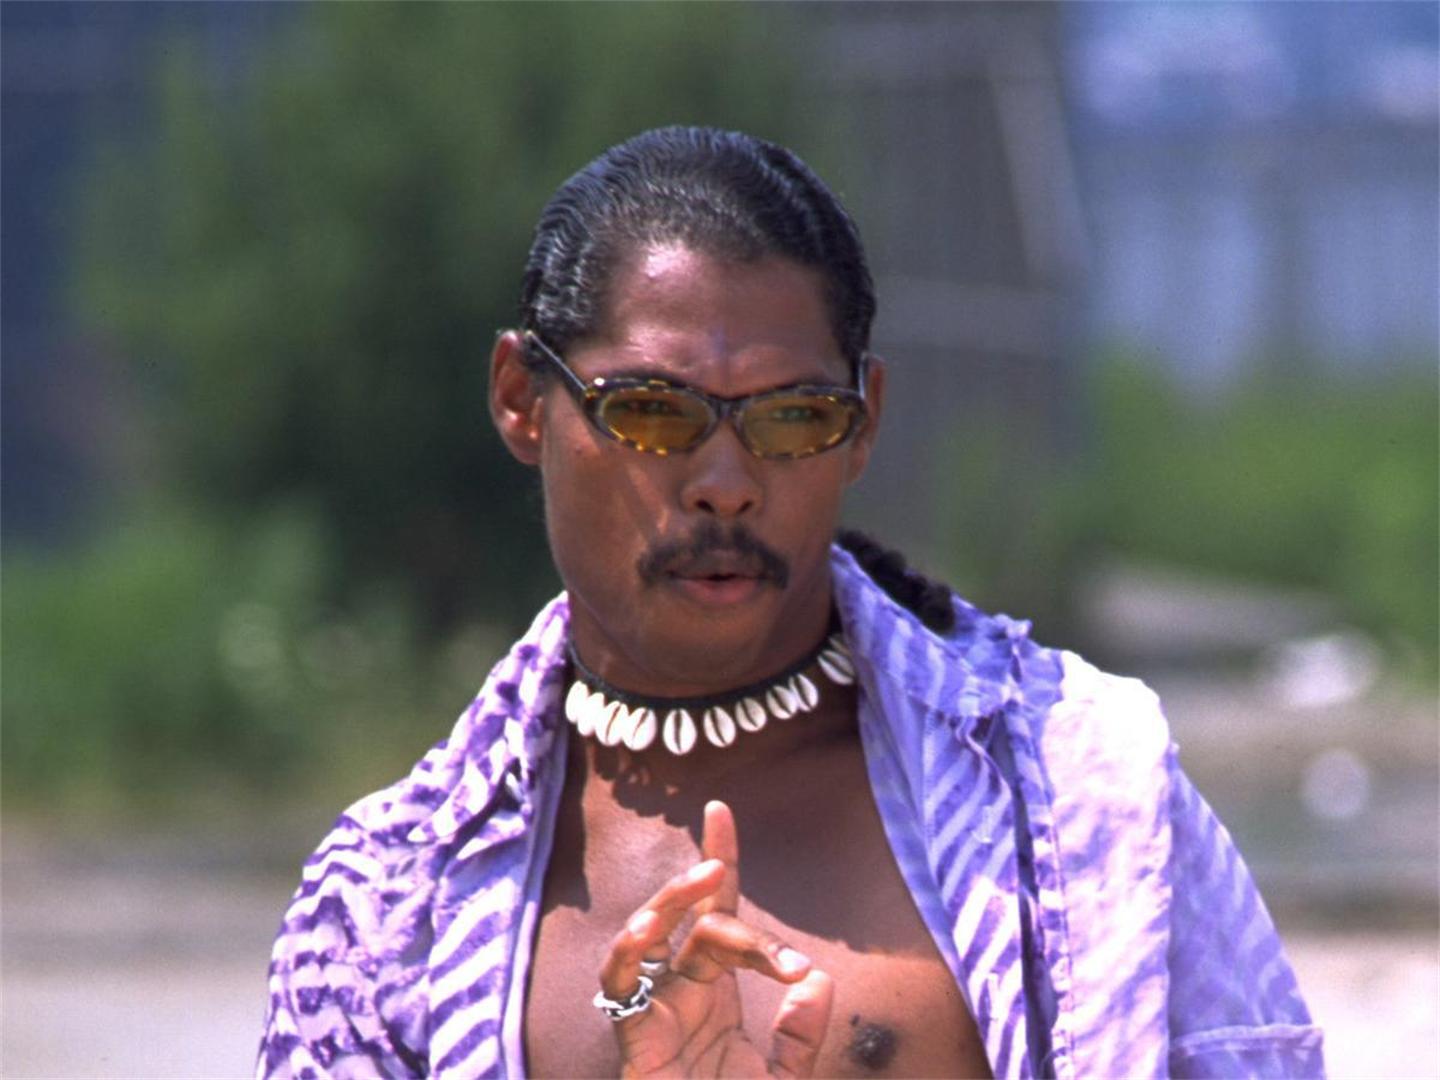 High Quality Pootie Tang say: Blank Meme Template